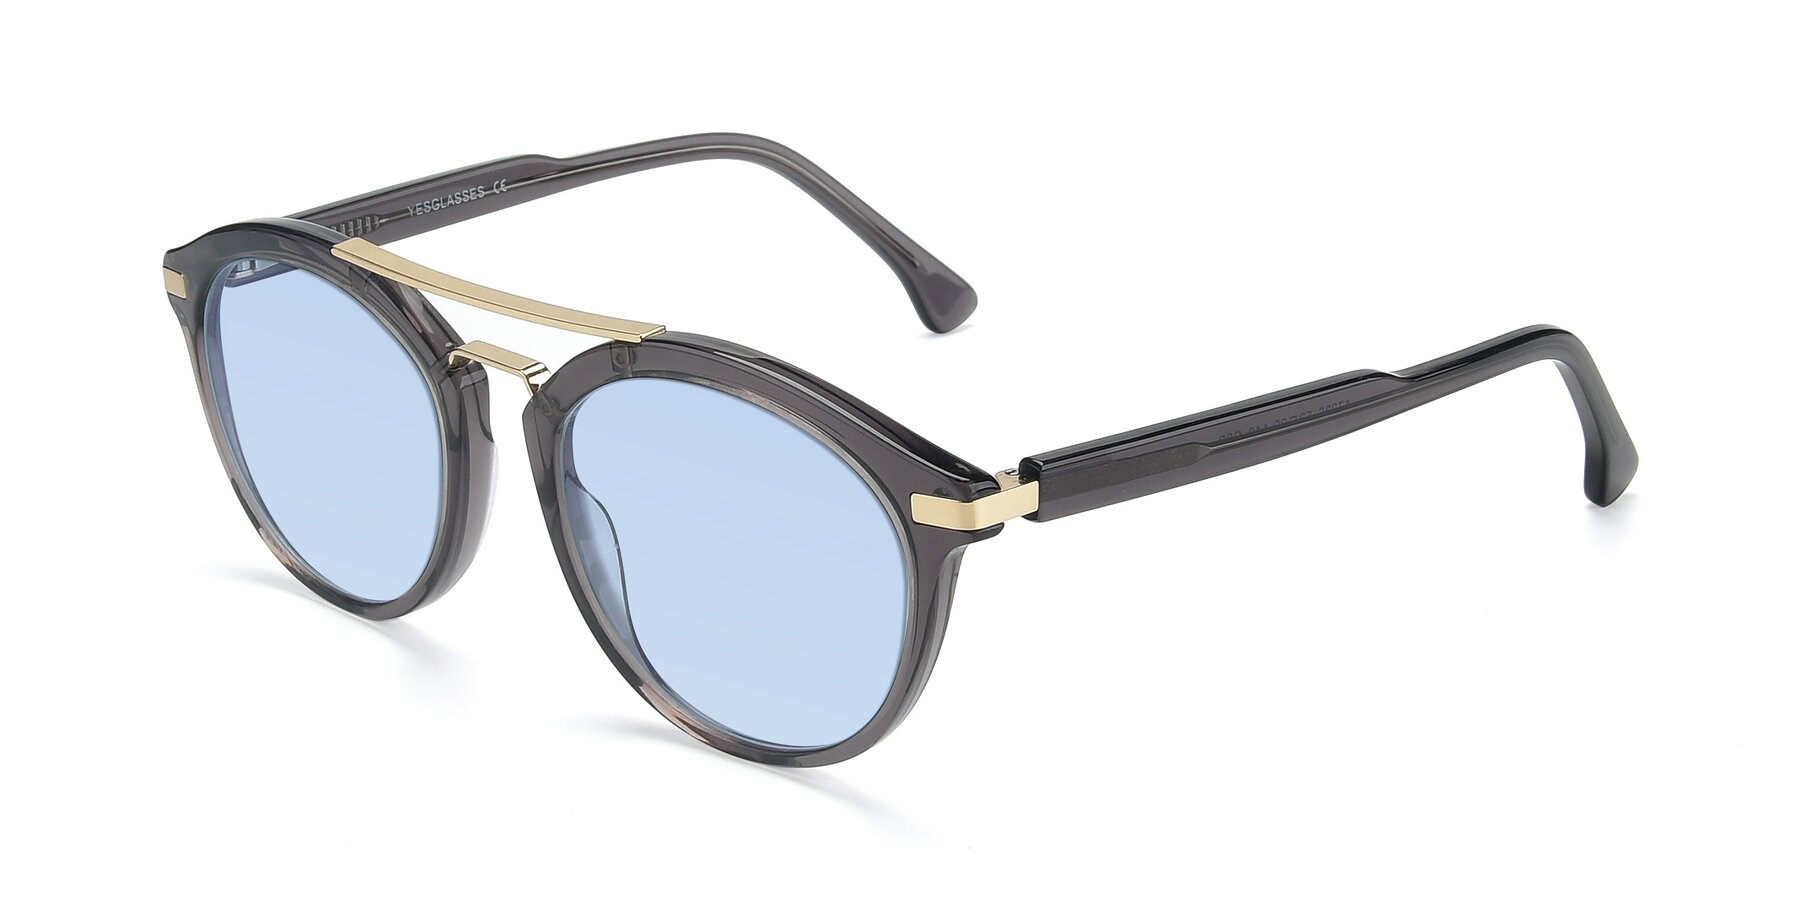 Angle of 17236 in Gray-Gold with Light Blue Tinted Lenses